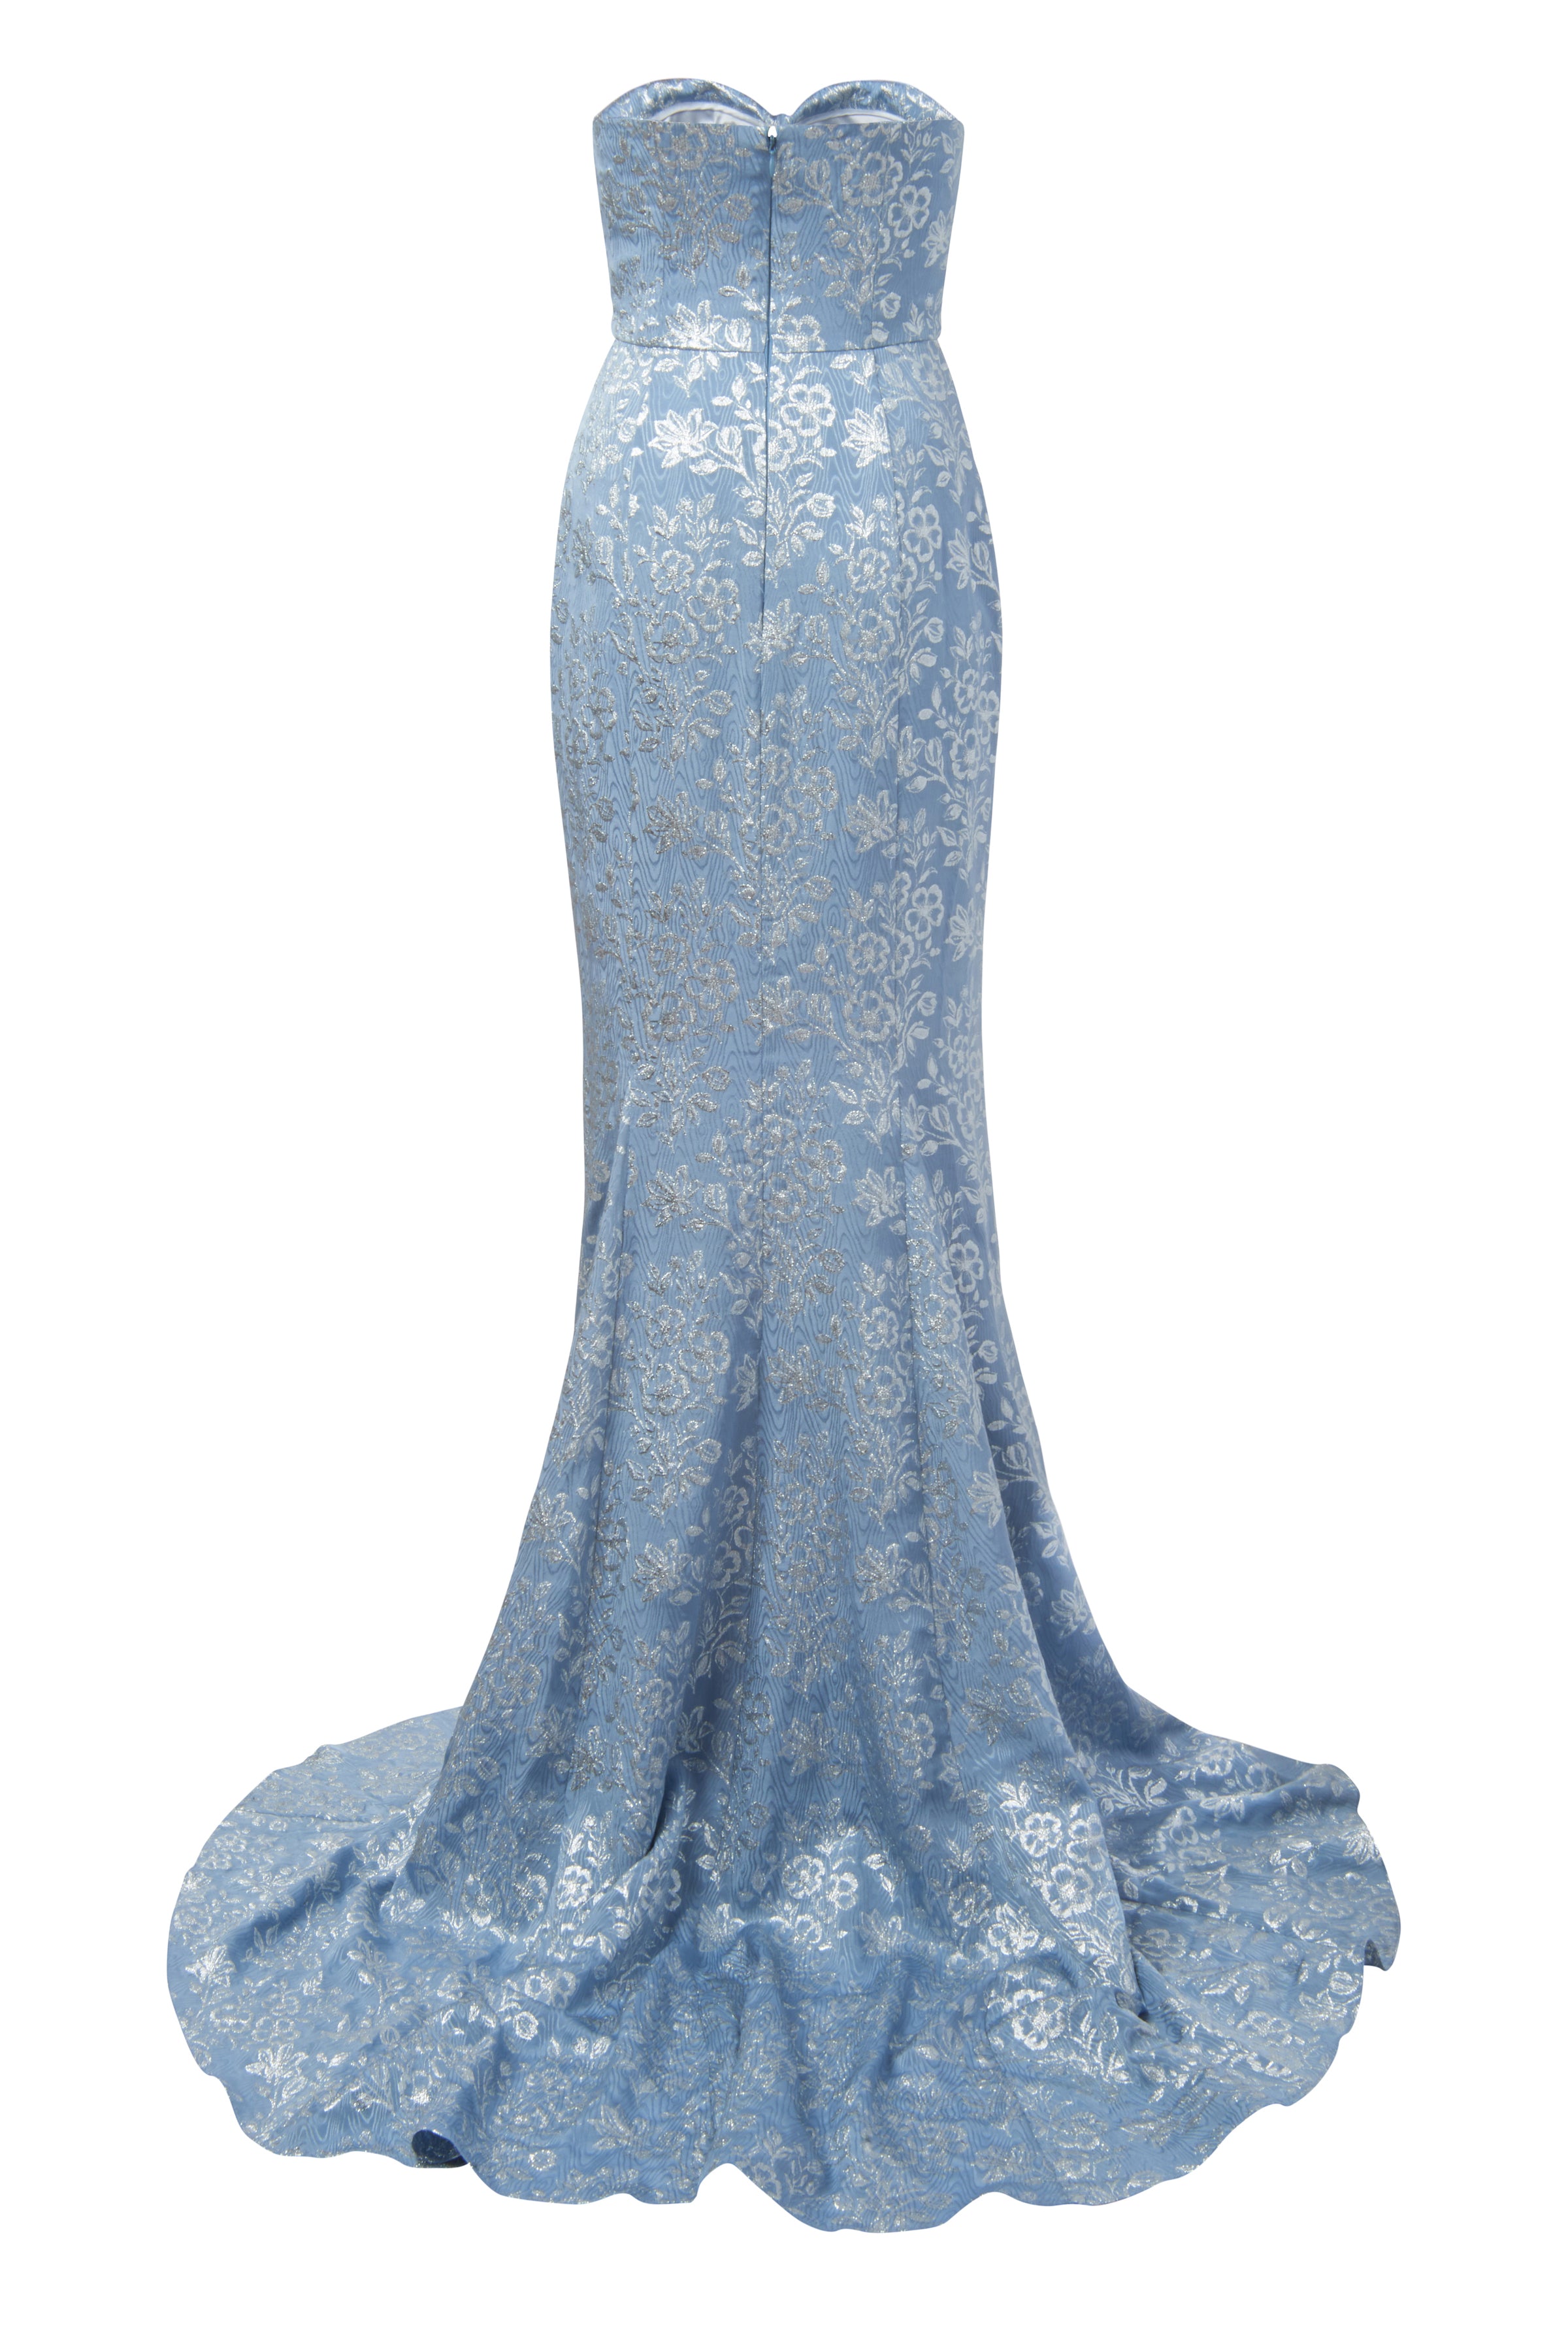 Leonora Blue Metallic Floral Strapless Gown With Sweetheart Neckline And Capelet